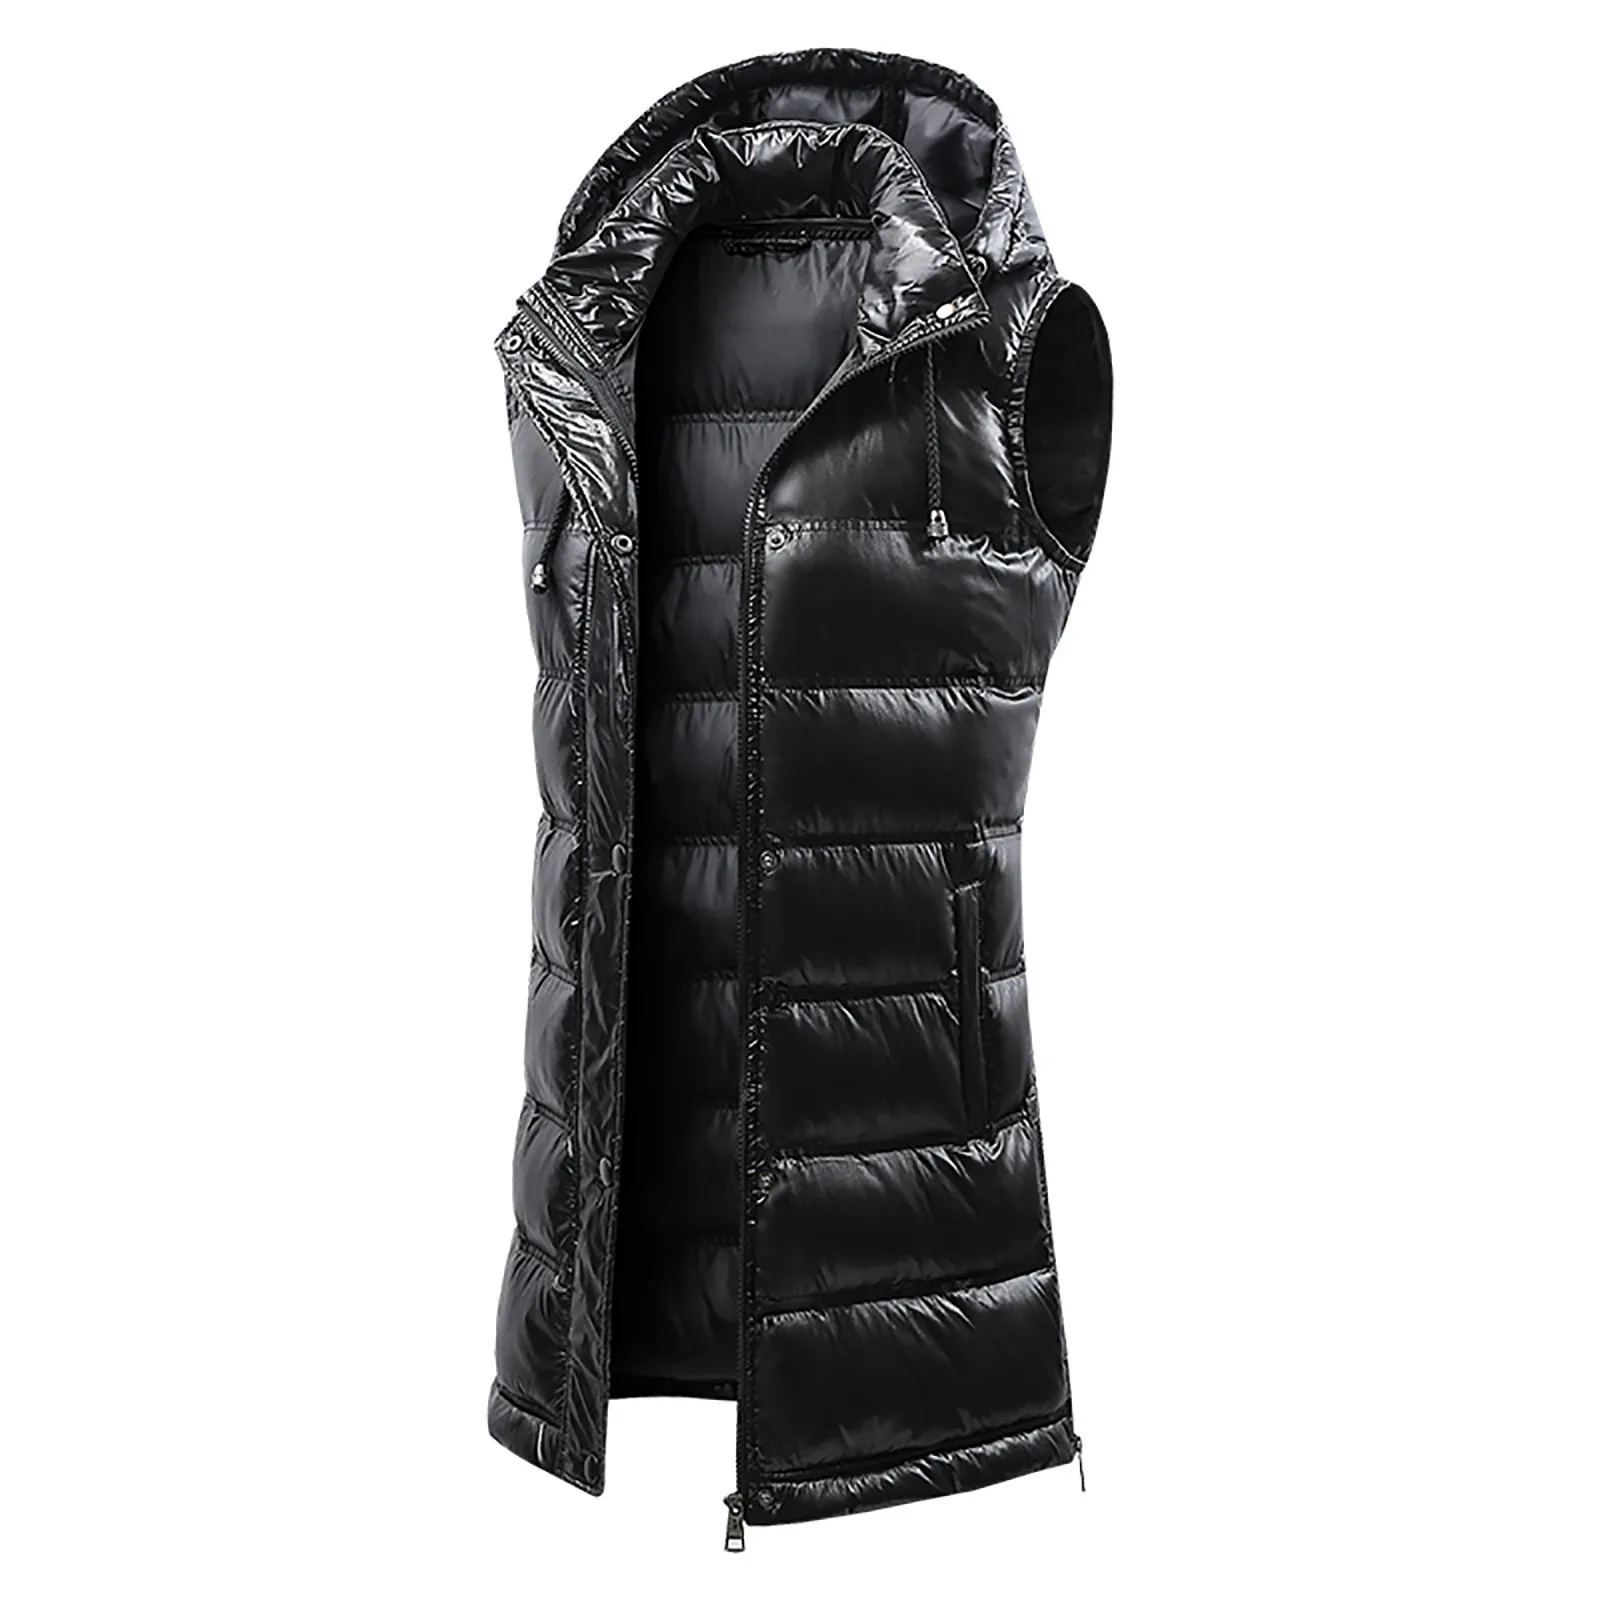 2021 Winter Women Cotton Down Vest Femme Hooded Sleeveless Warm Down Coat Vest New Fashion Outerwear Casual Ladies Padded Jacket